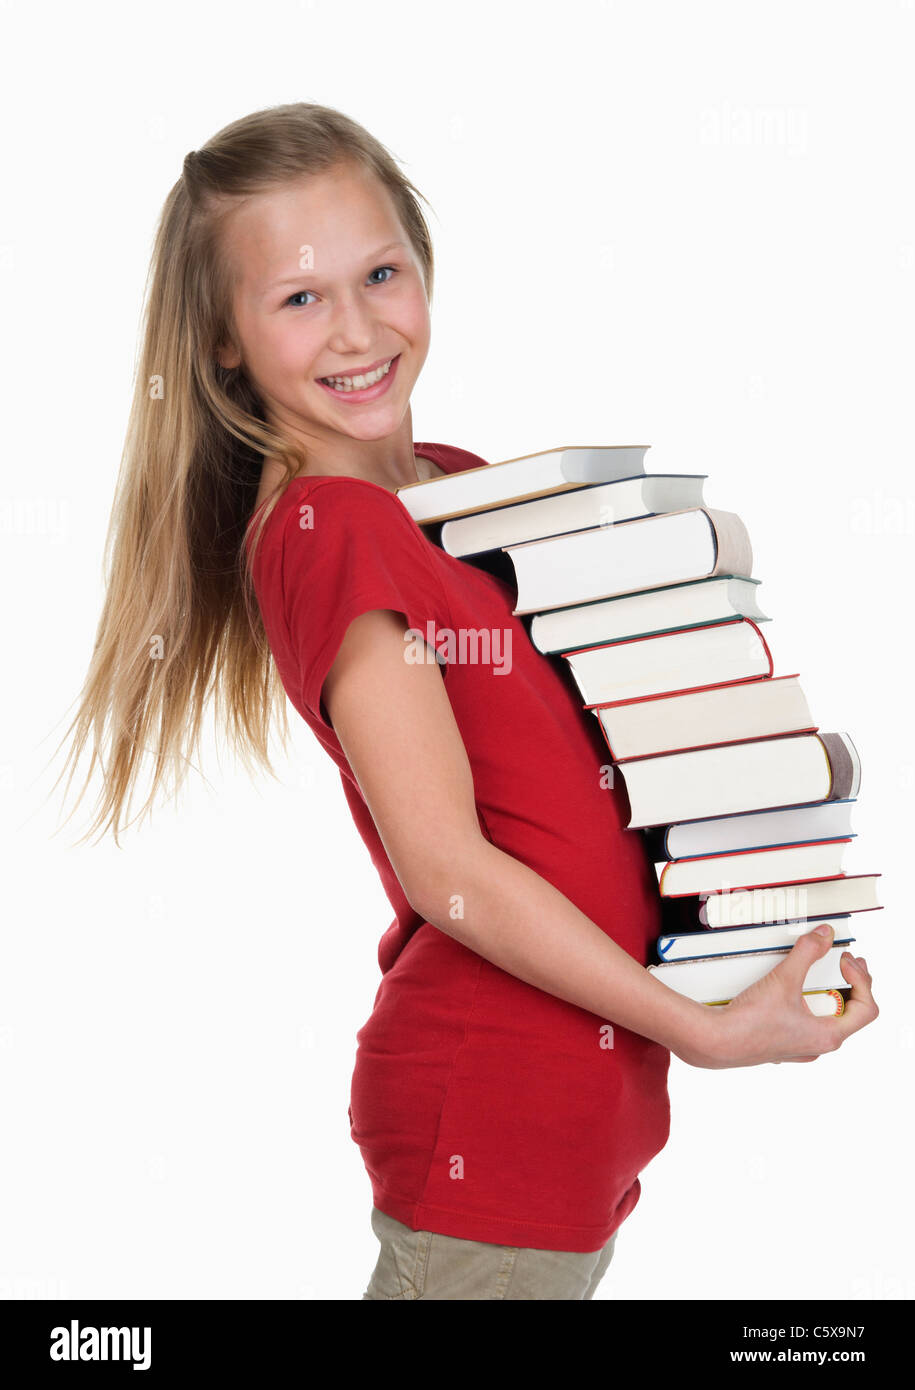 Girl carrying stack of books against white background Banque D'Images